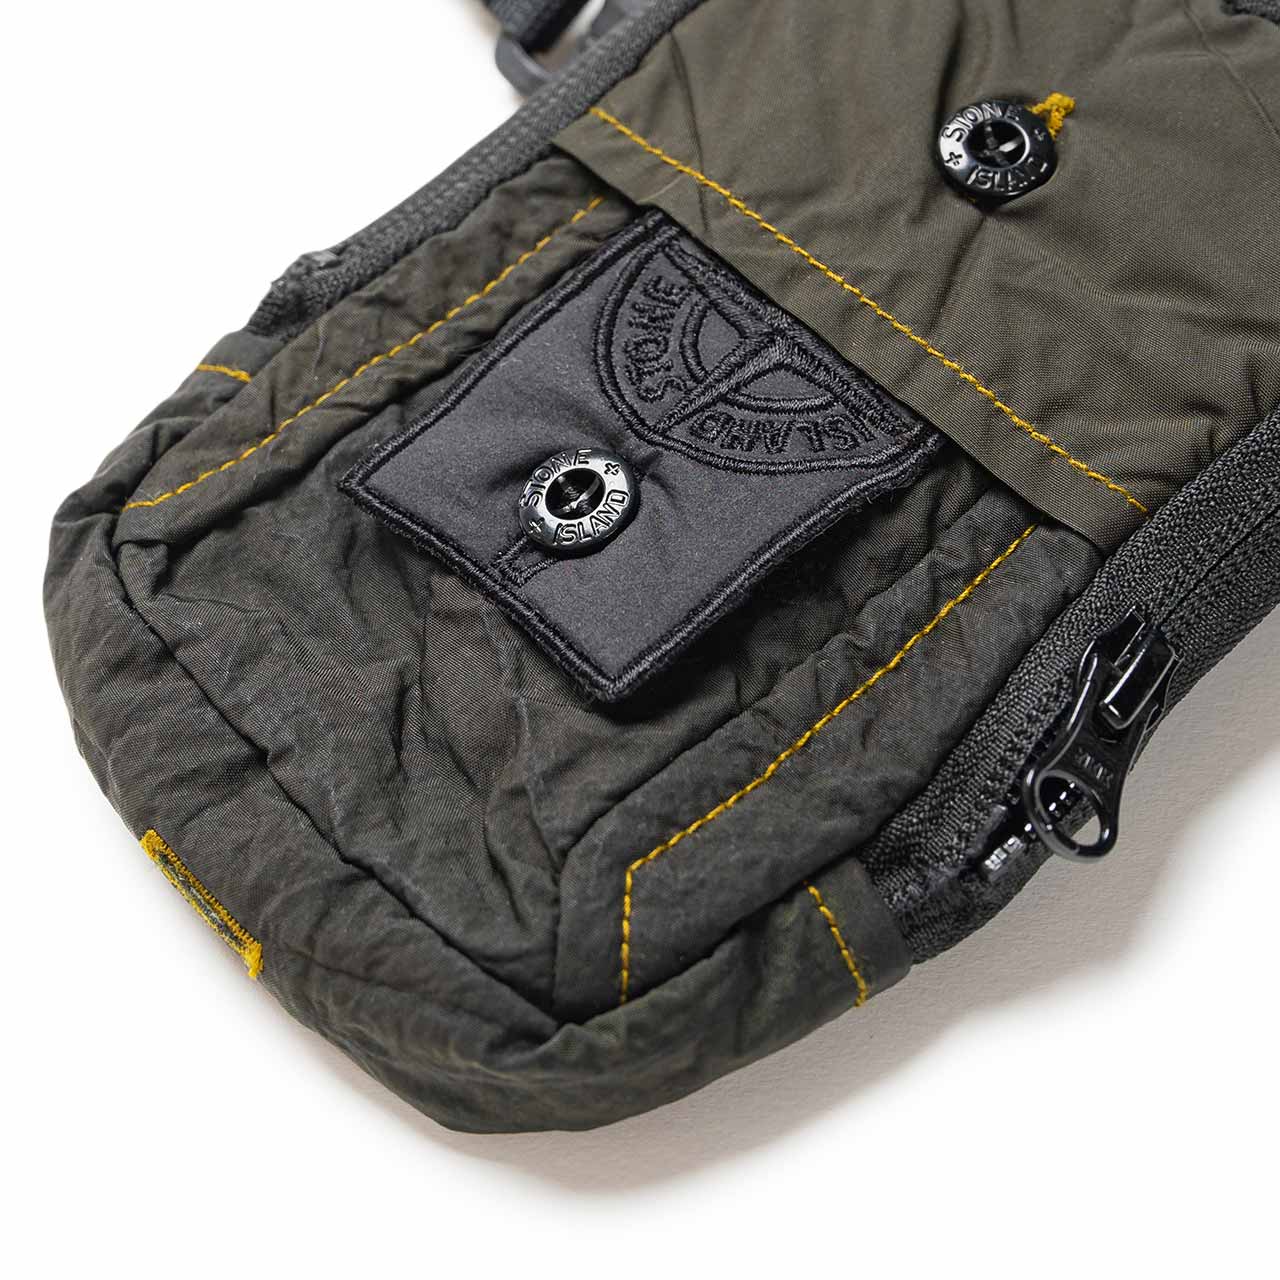 stone island shadow project compact pouch (olive / black) - 721990420.v0054 - a.plus - Image - 3